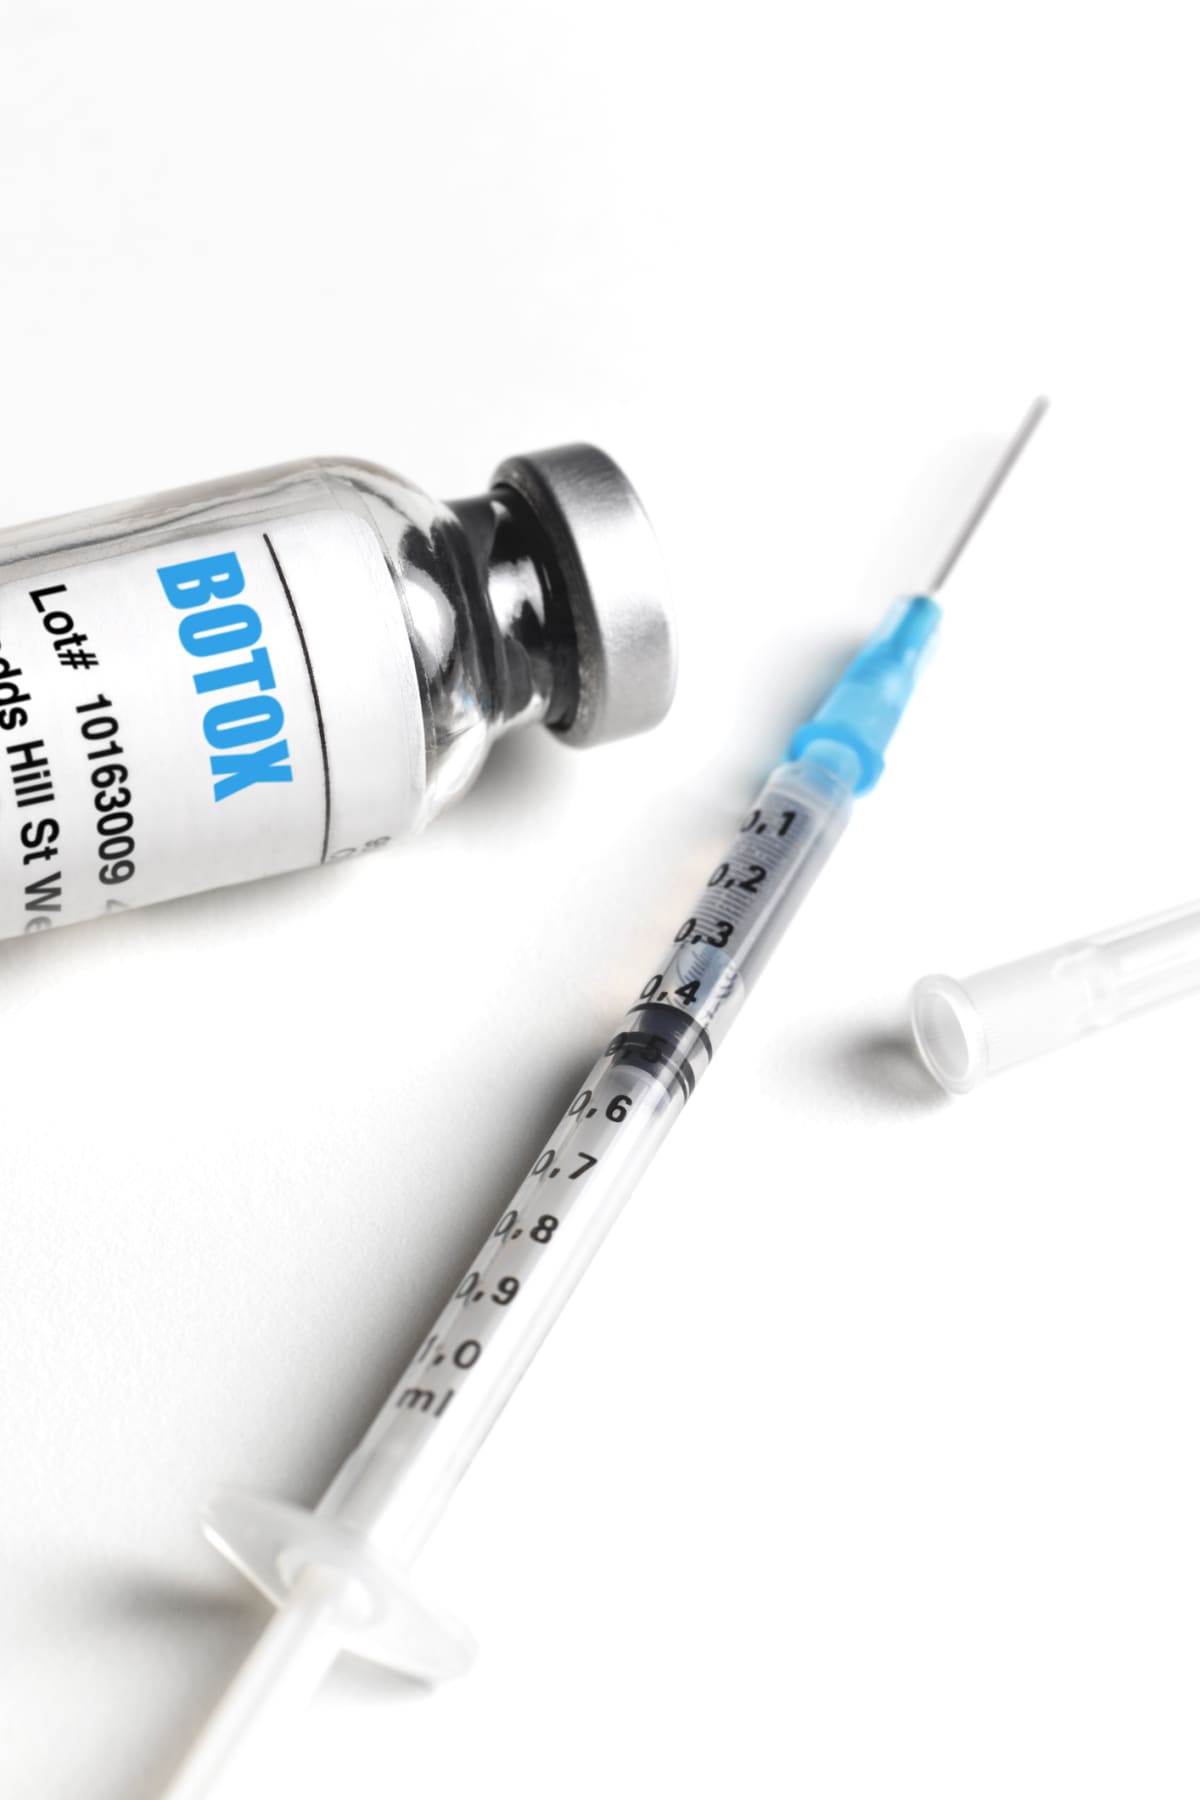 A bottle of Botox and an injection needle